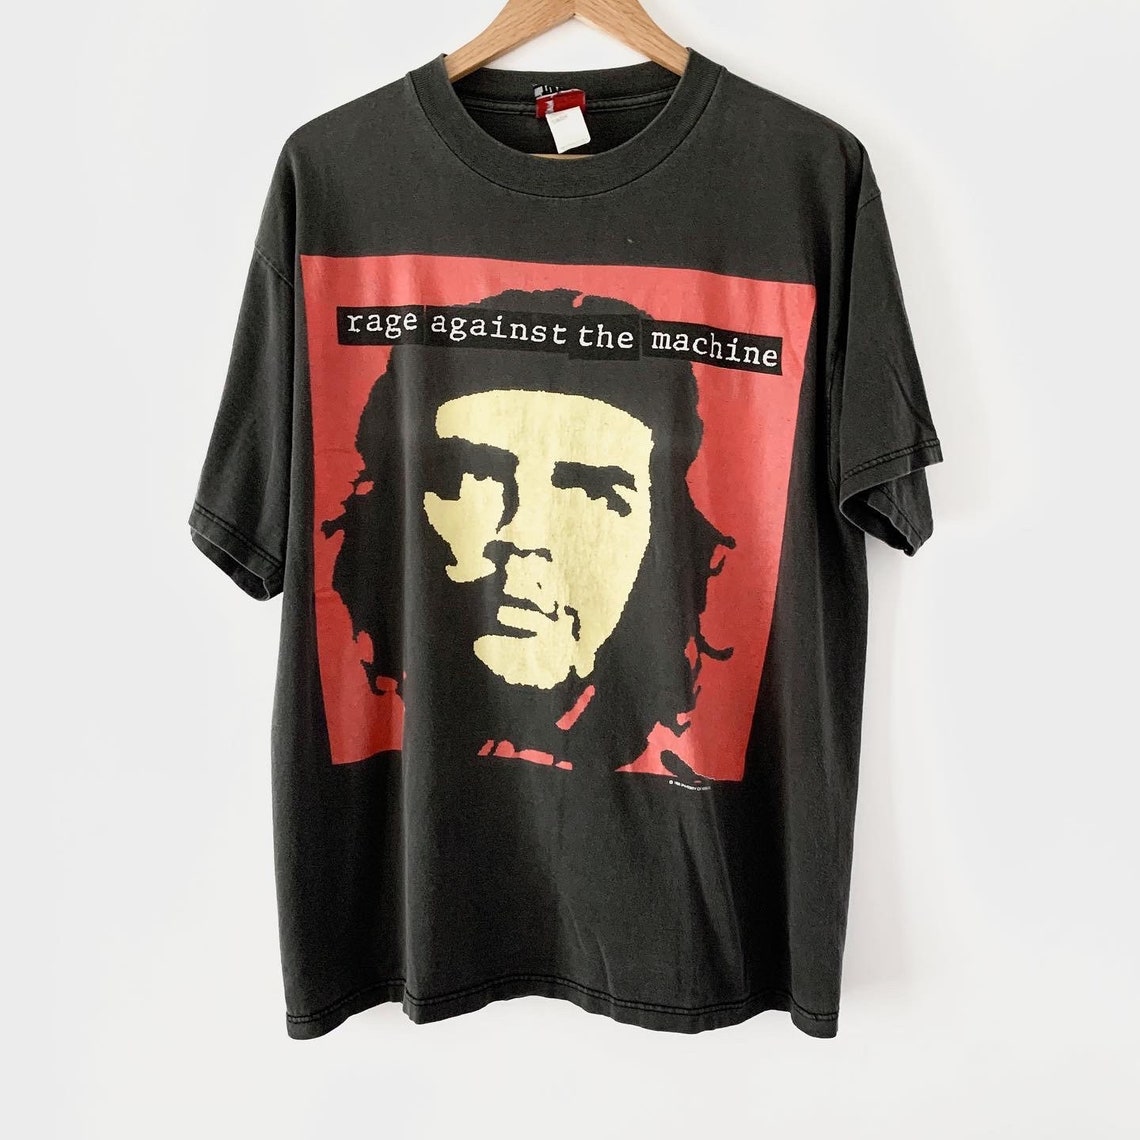 1997 Rage Against the Machine Che Guevara Vintage Band Tour - Etsy